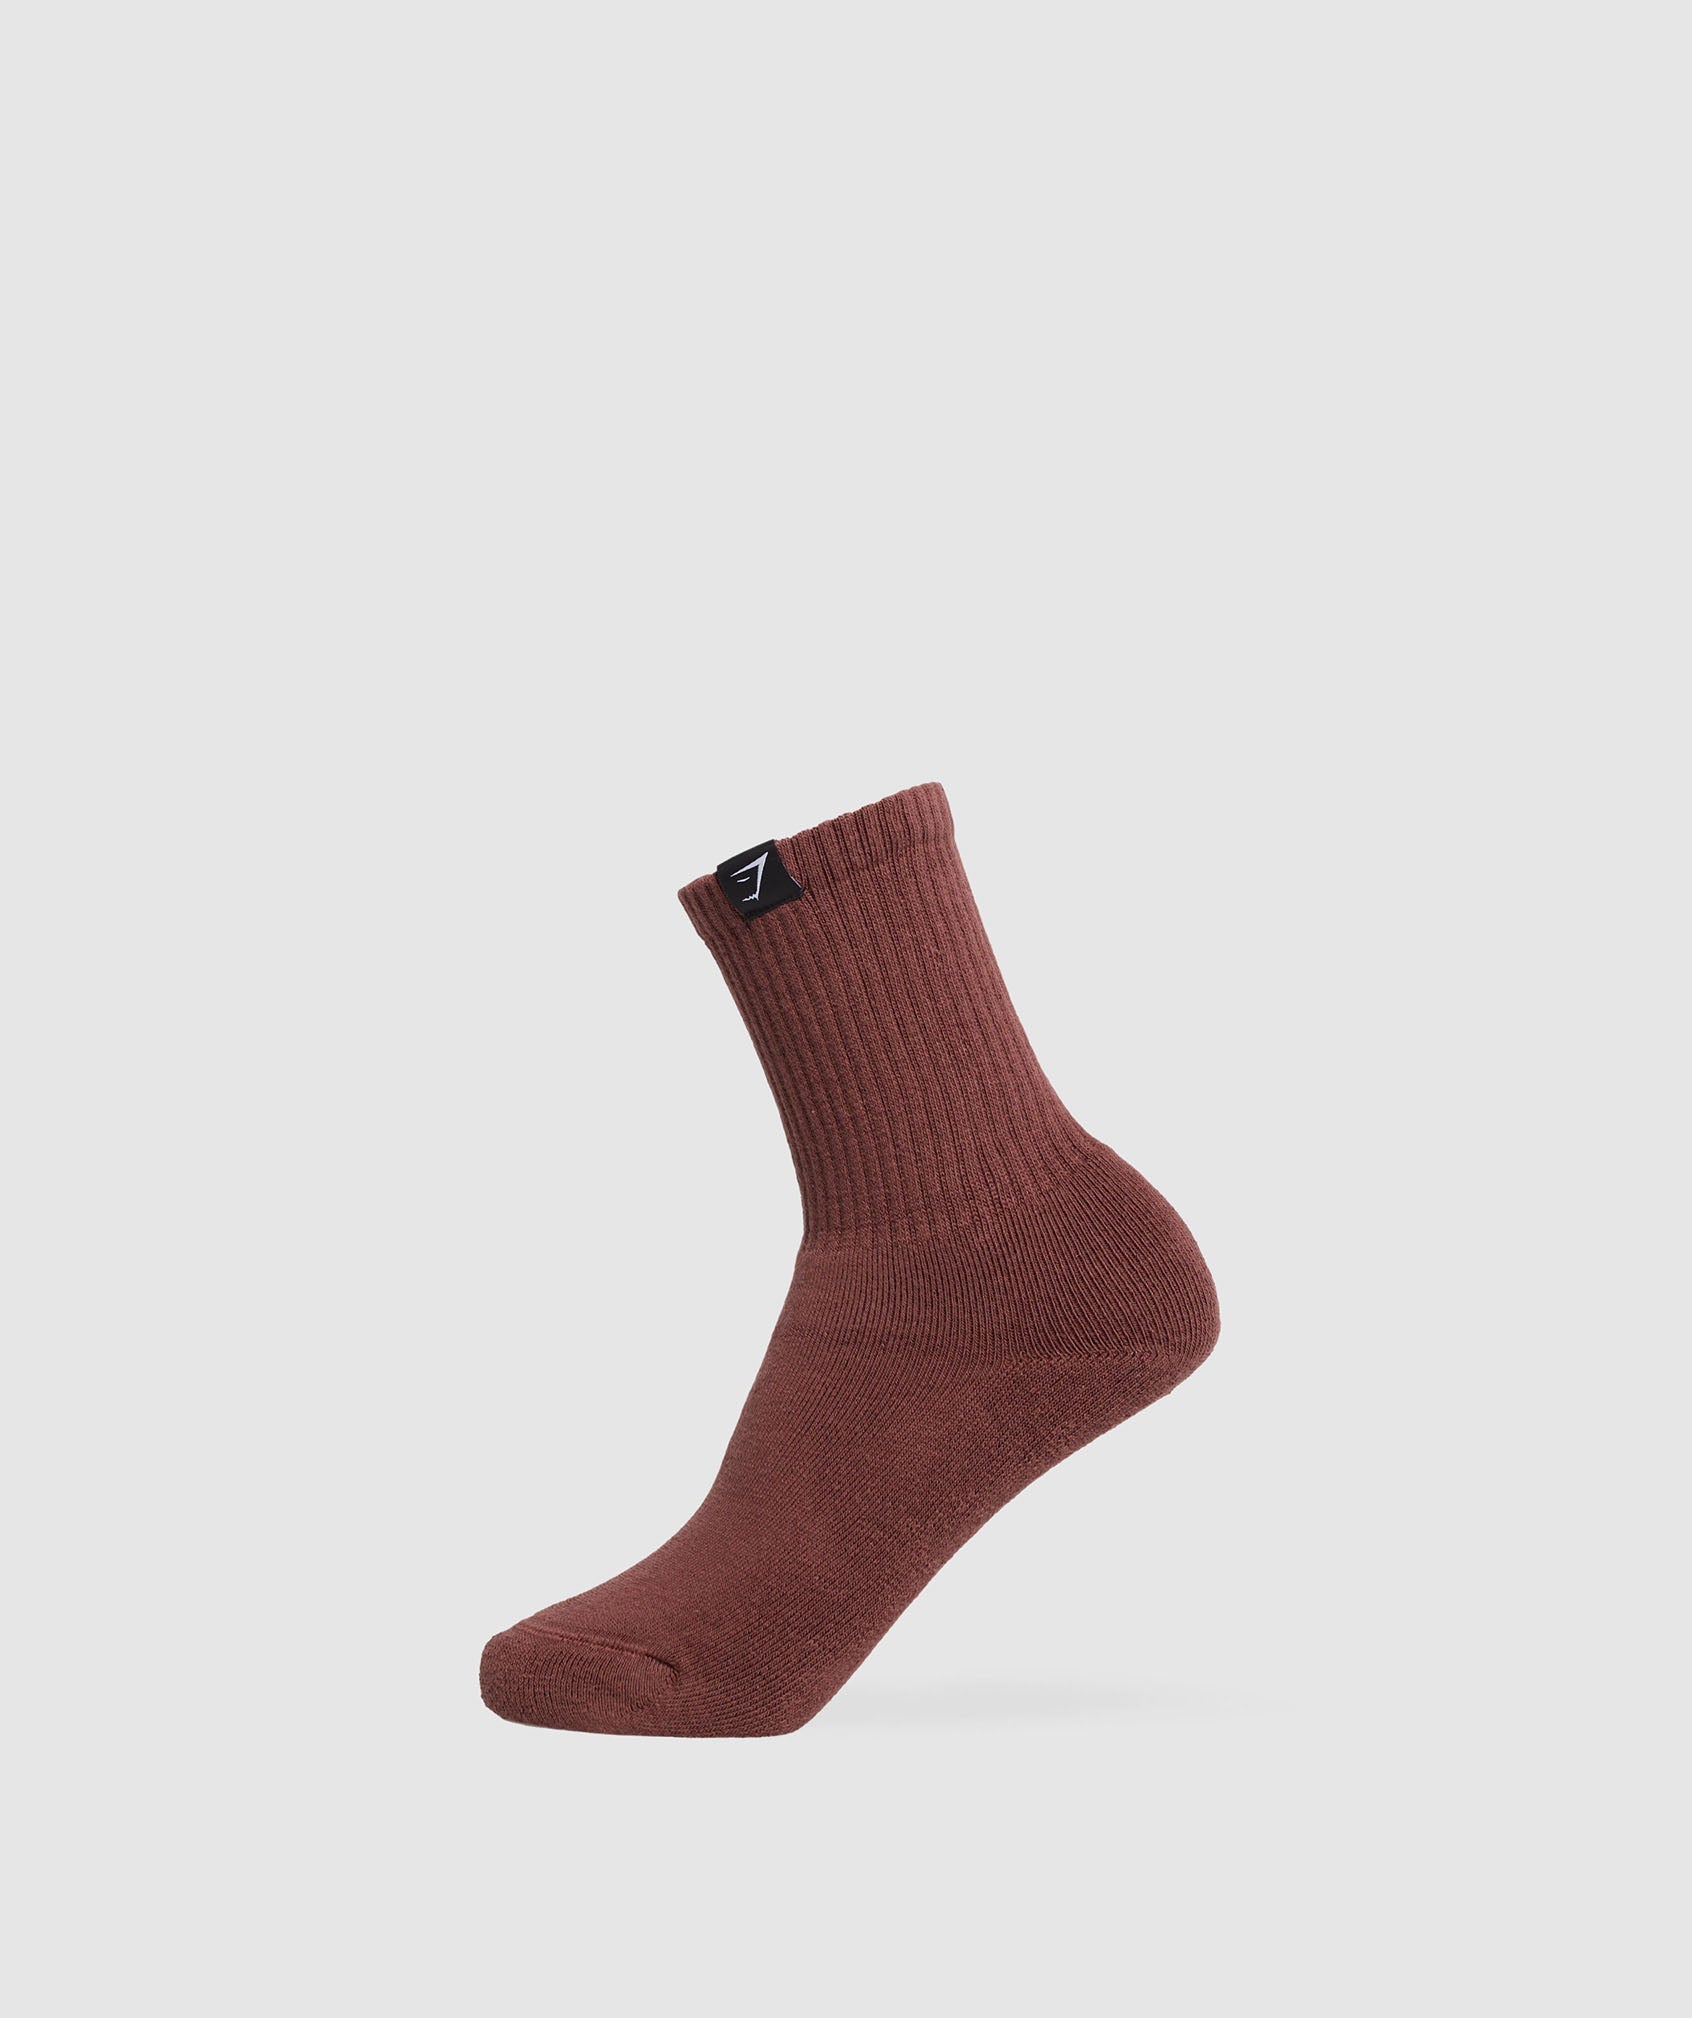 Premium Combed Cotton Single in Burgundy Brown - view 1